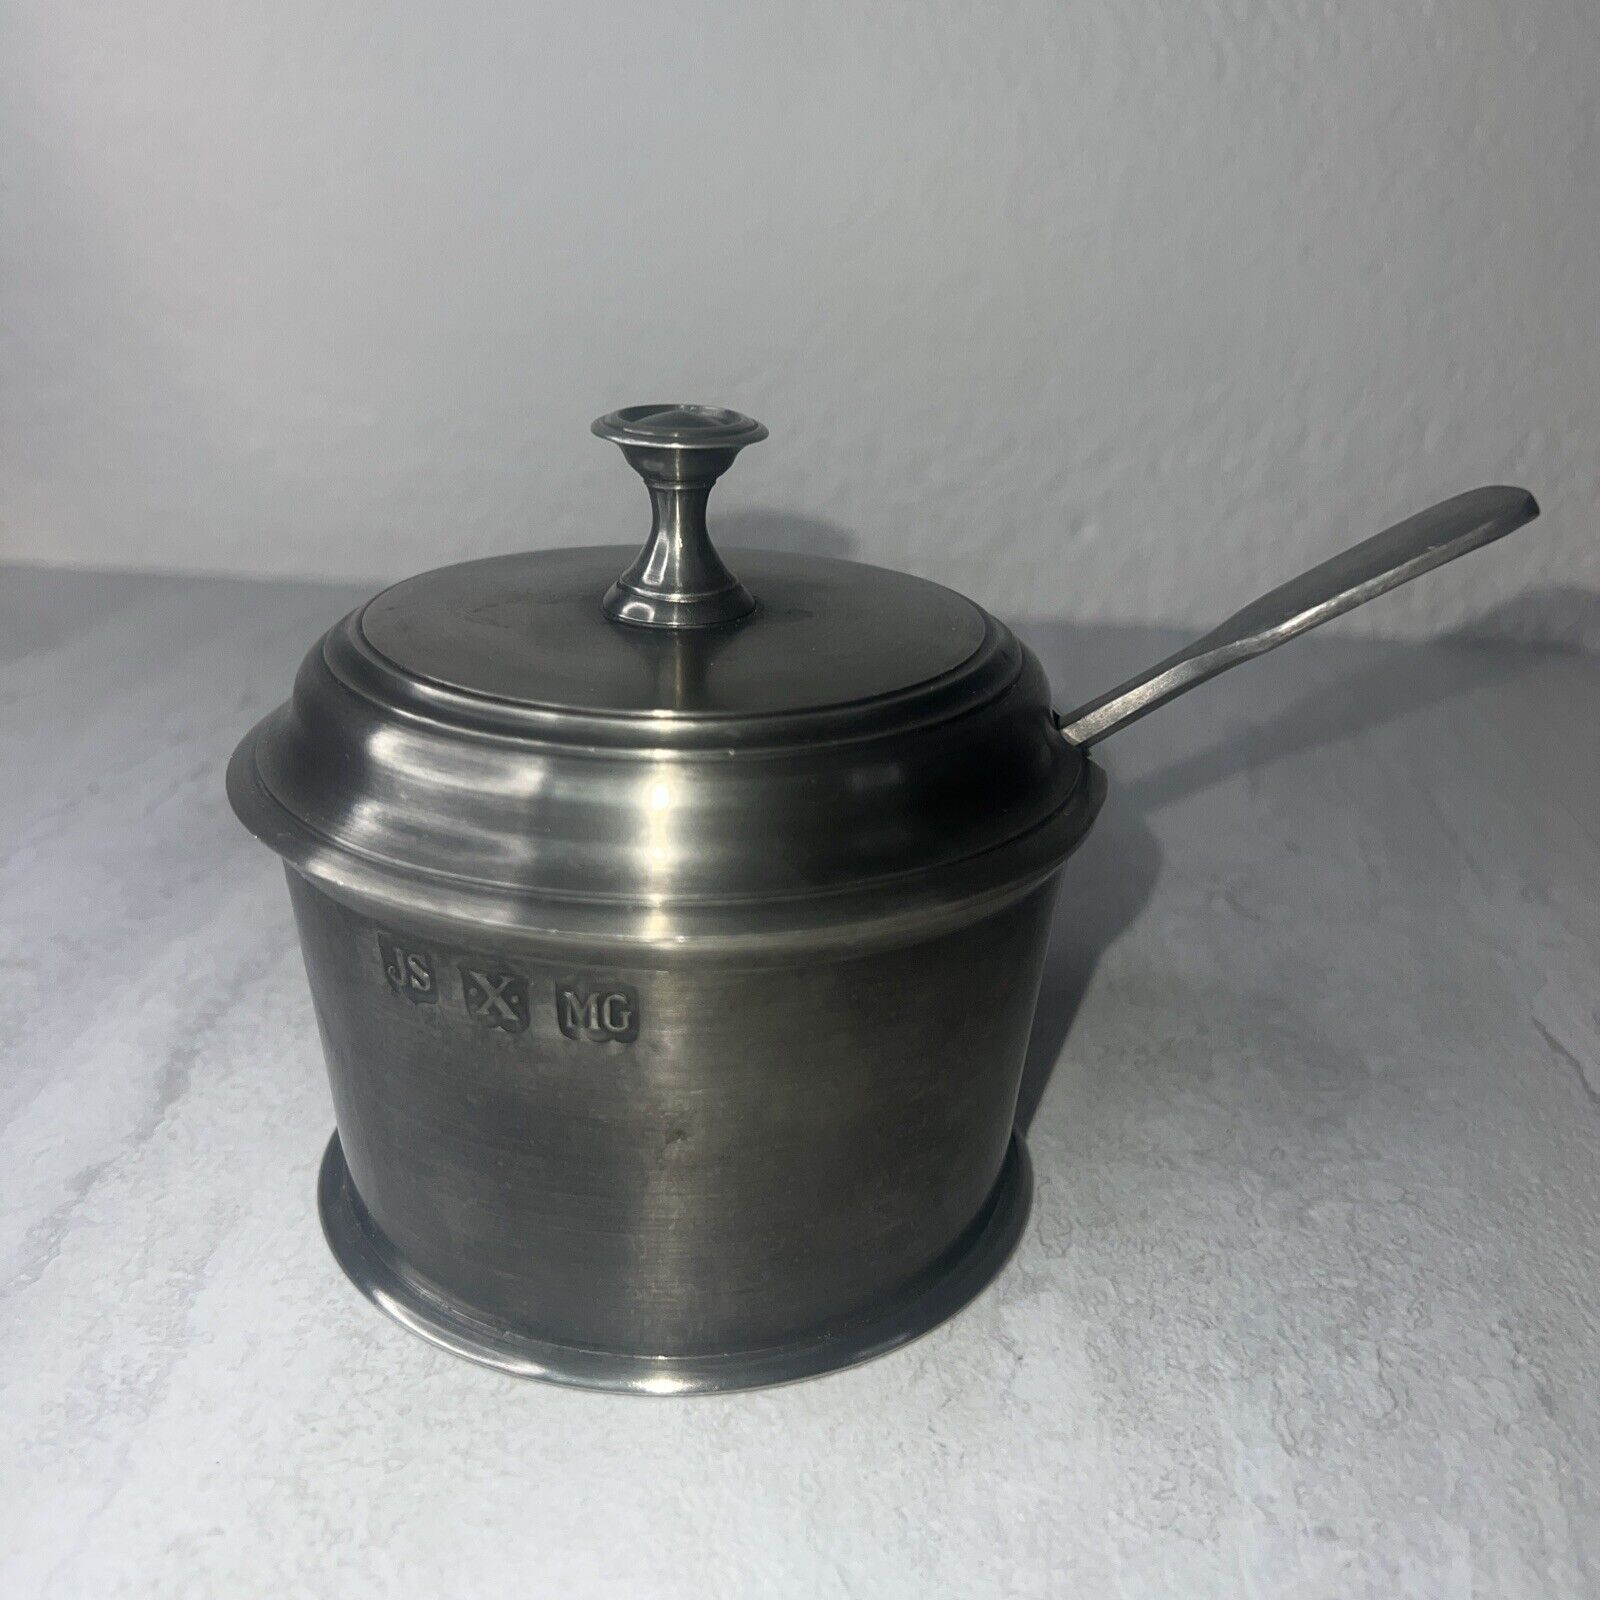 john somers brazil pewter Condiment Sugar Dish With Lid And Spoon Vintage Flaws